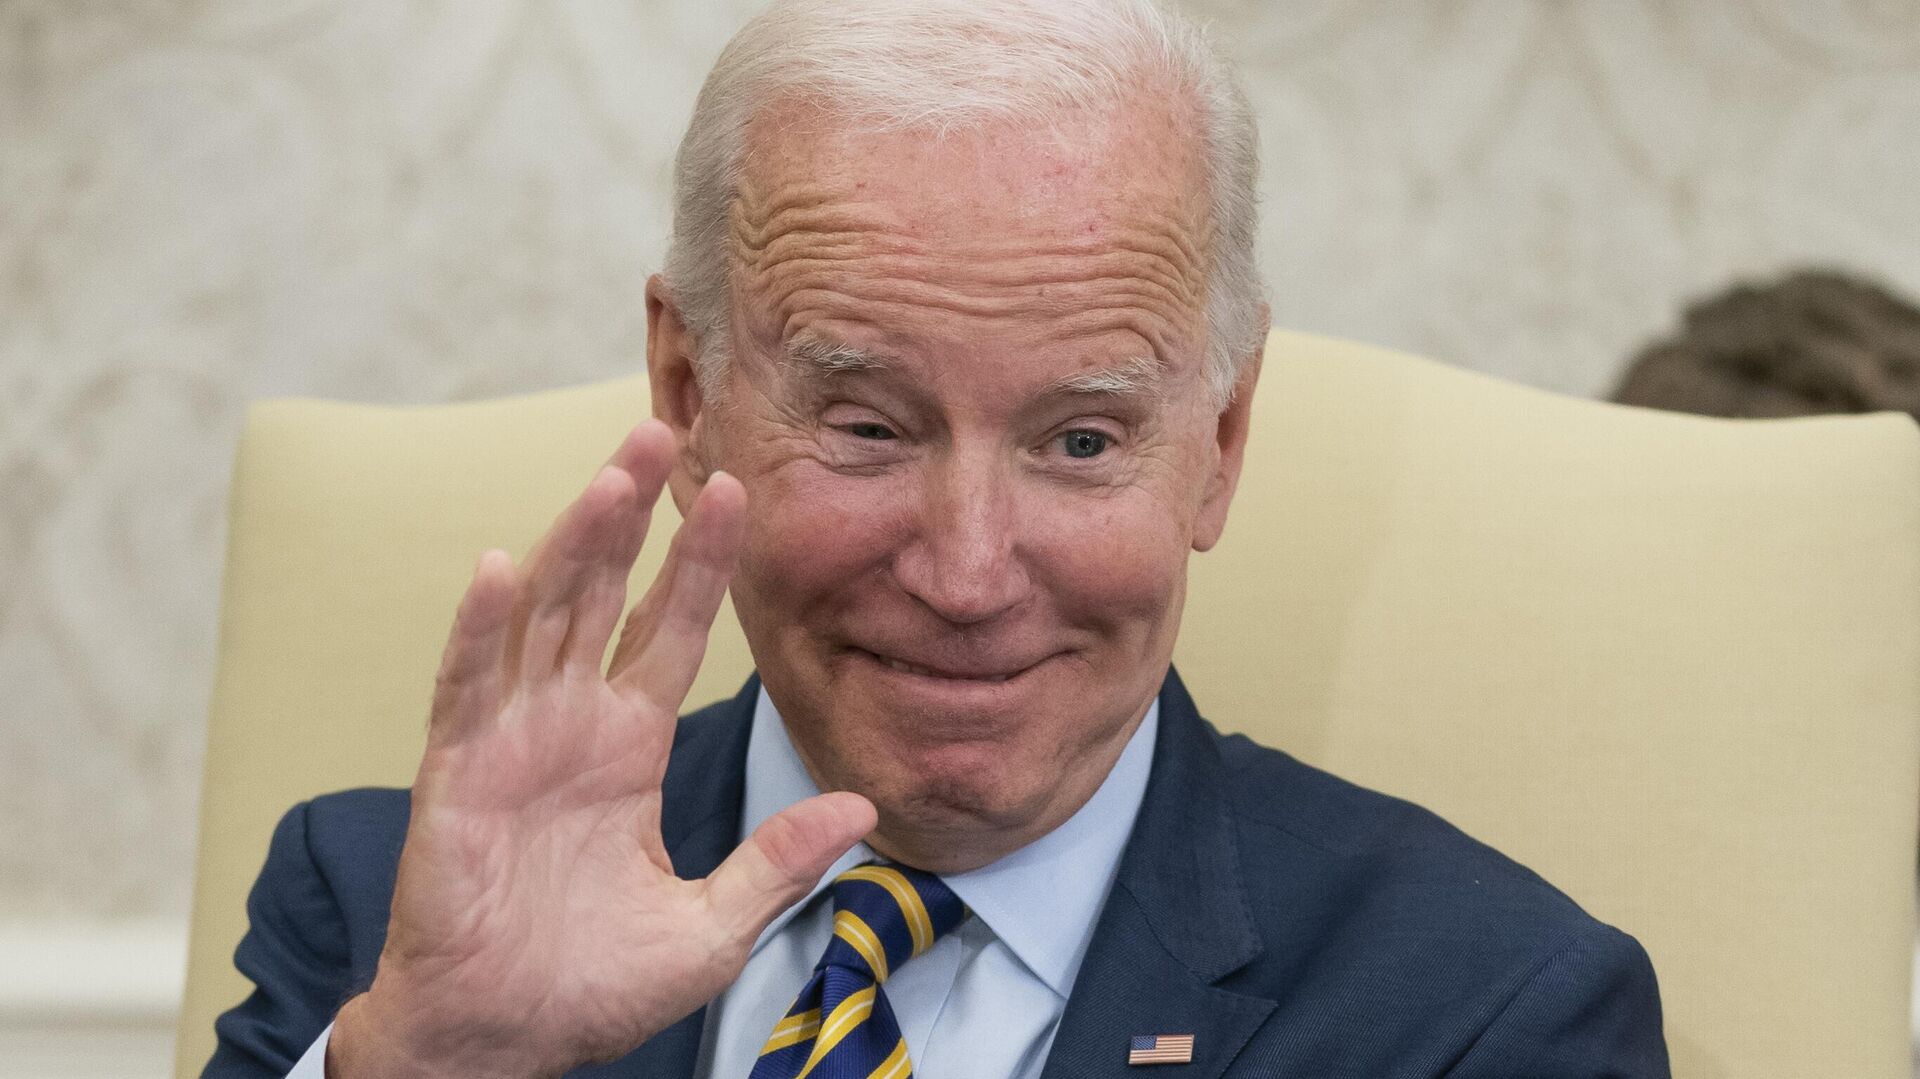 President Joe Biden waves during a meeting with South African President Cyril Ramaphosa in the Oval Office of the White House, Friday, Sept. 16, 2022, in Washington.  - Sputnik International, 1920, 11.12.2022